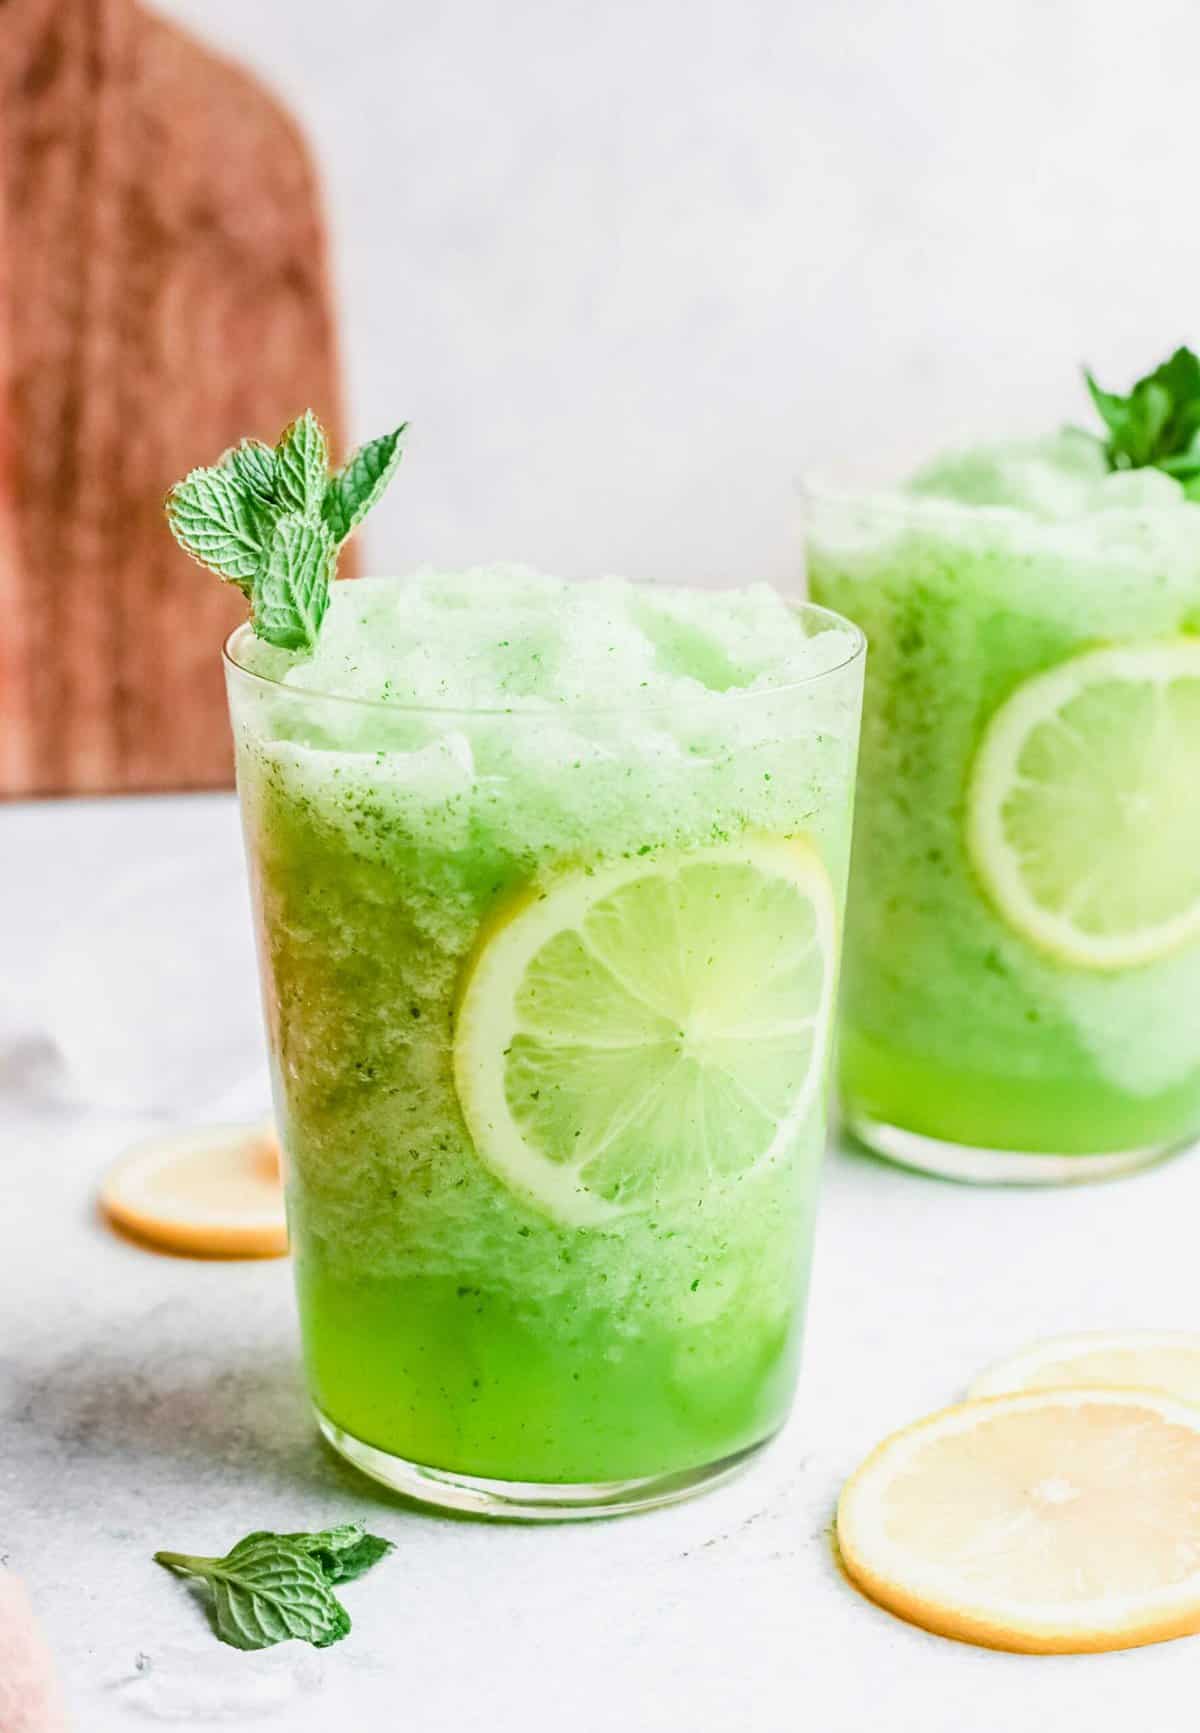 Drinks - Variety of Alcoholic and Non-Alcoholic Drink Recipes